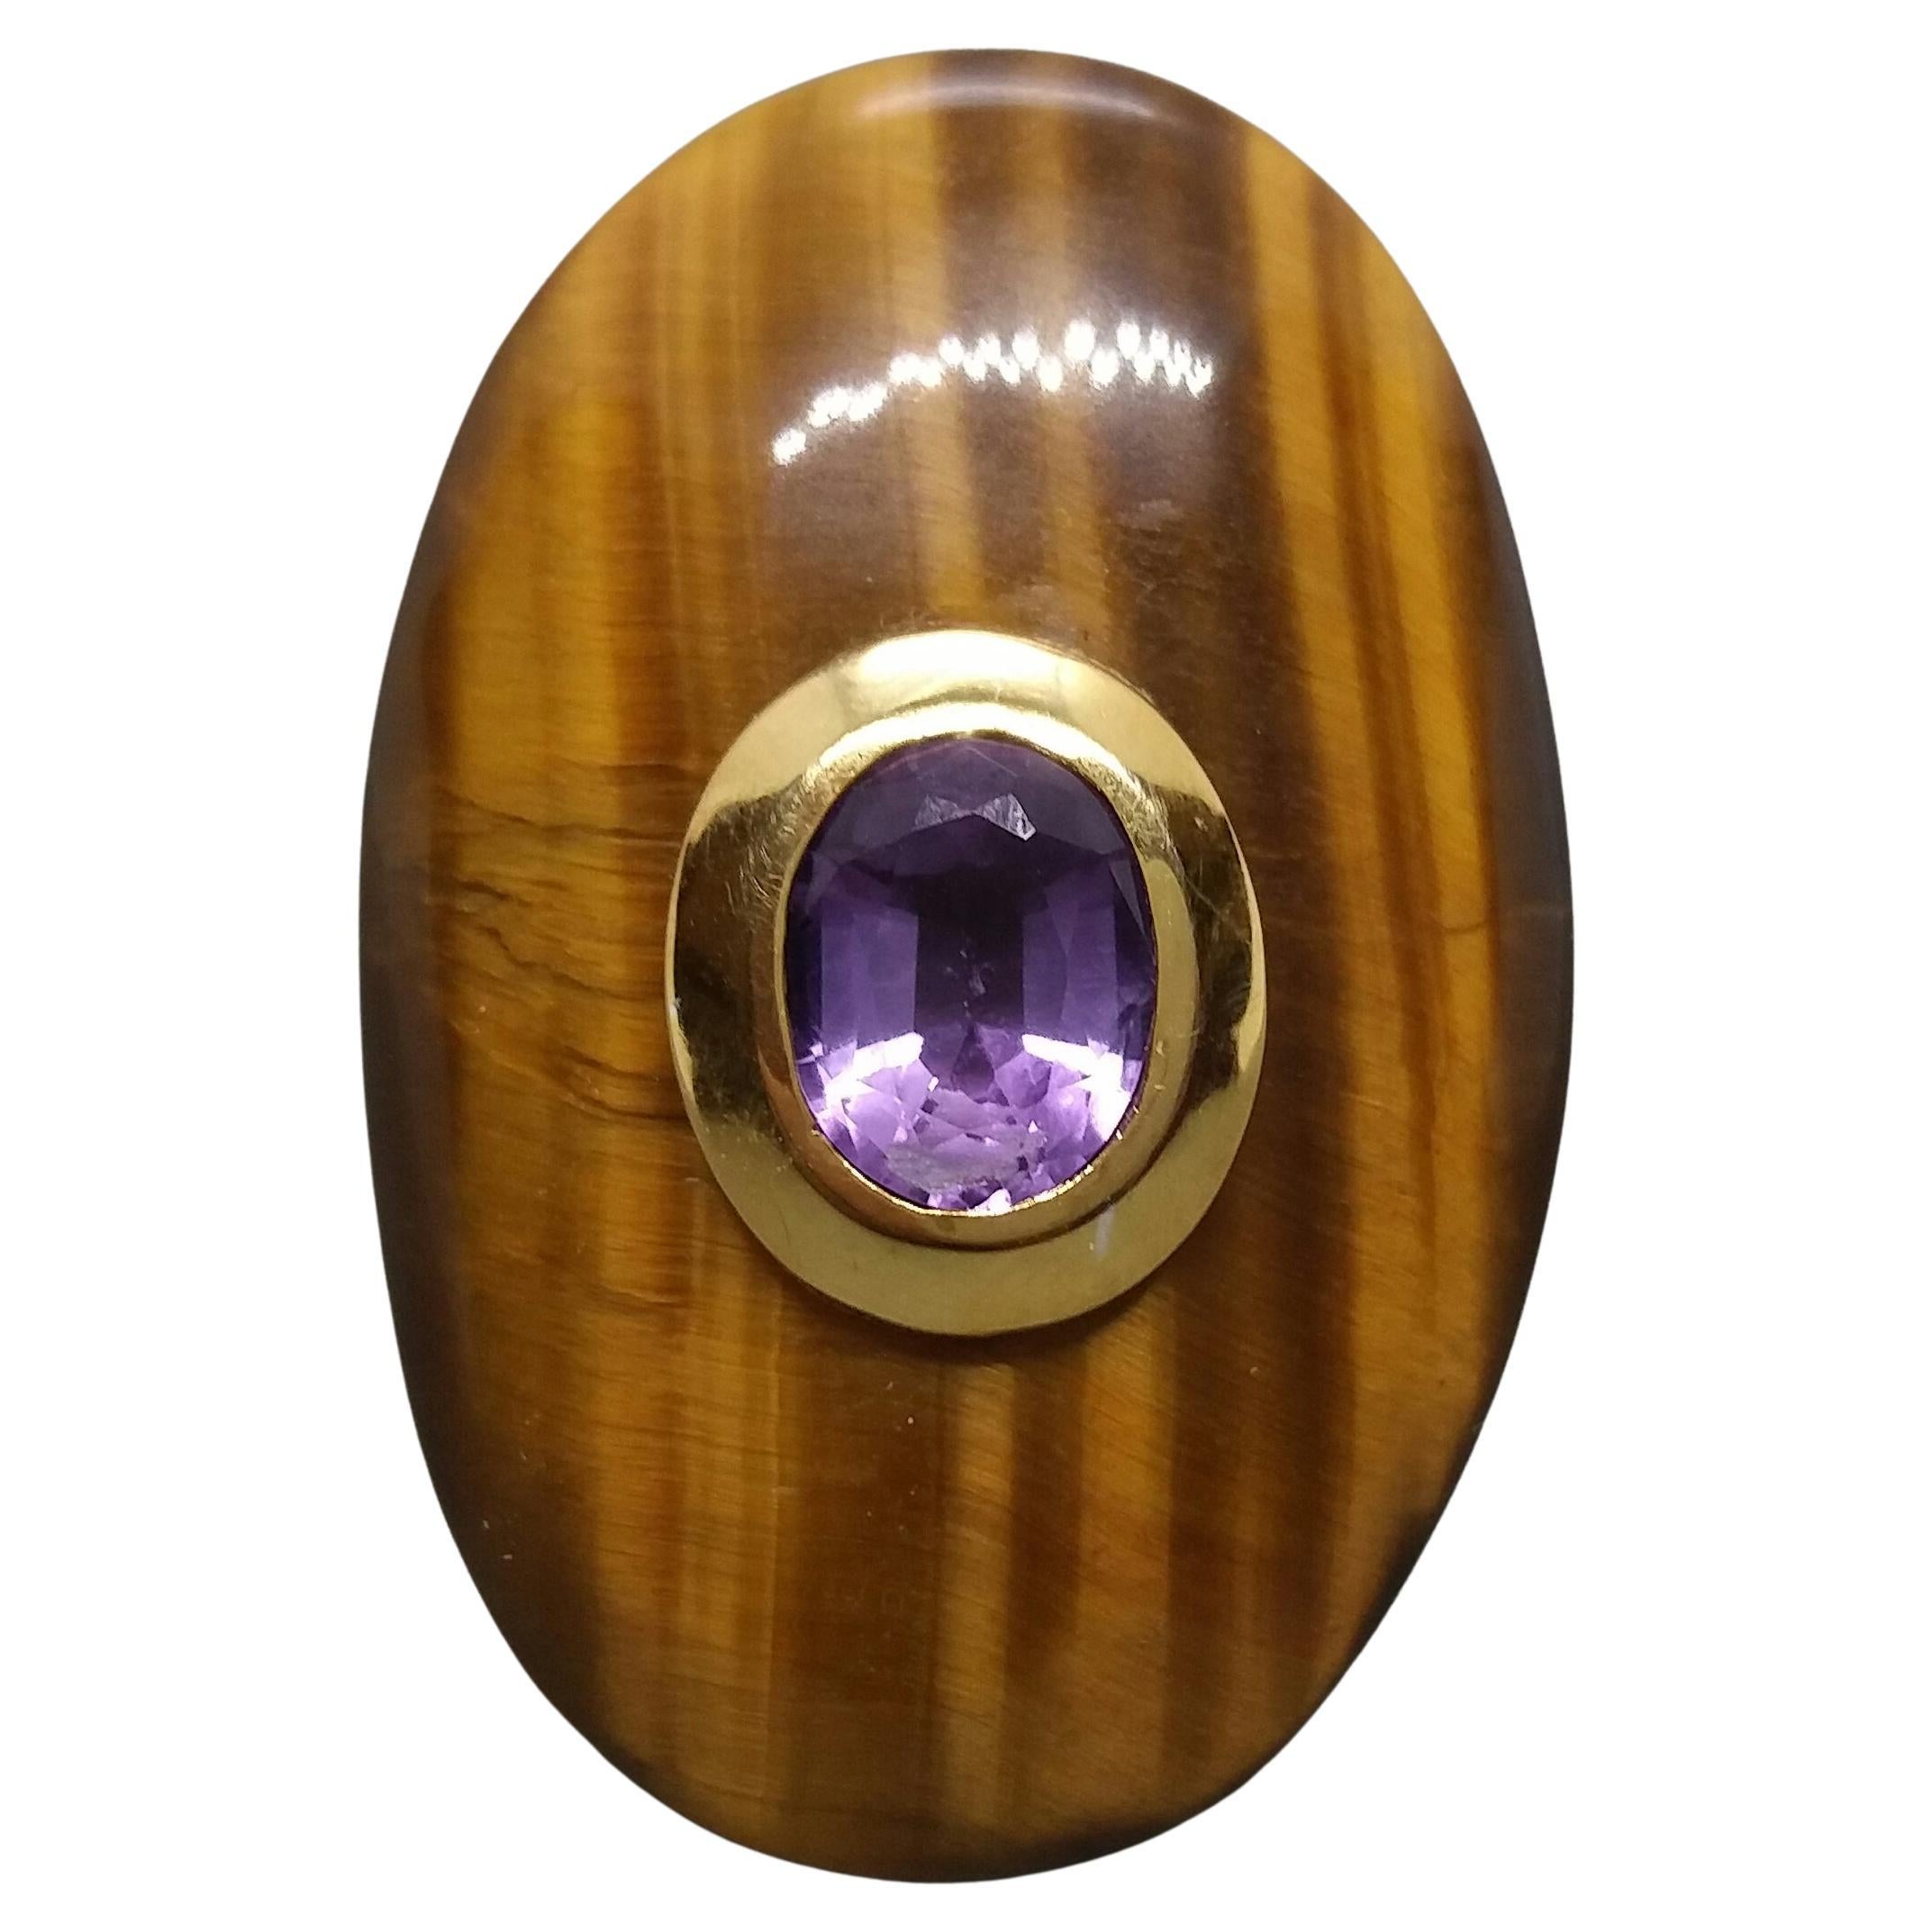 Oval Shape Tiger Eye Faceted Oval Amethyst 14 Kt Gold Cocktail Ring